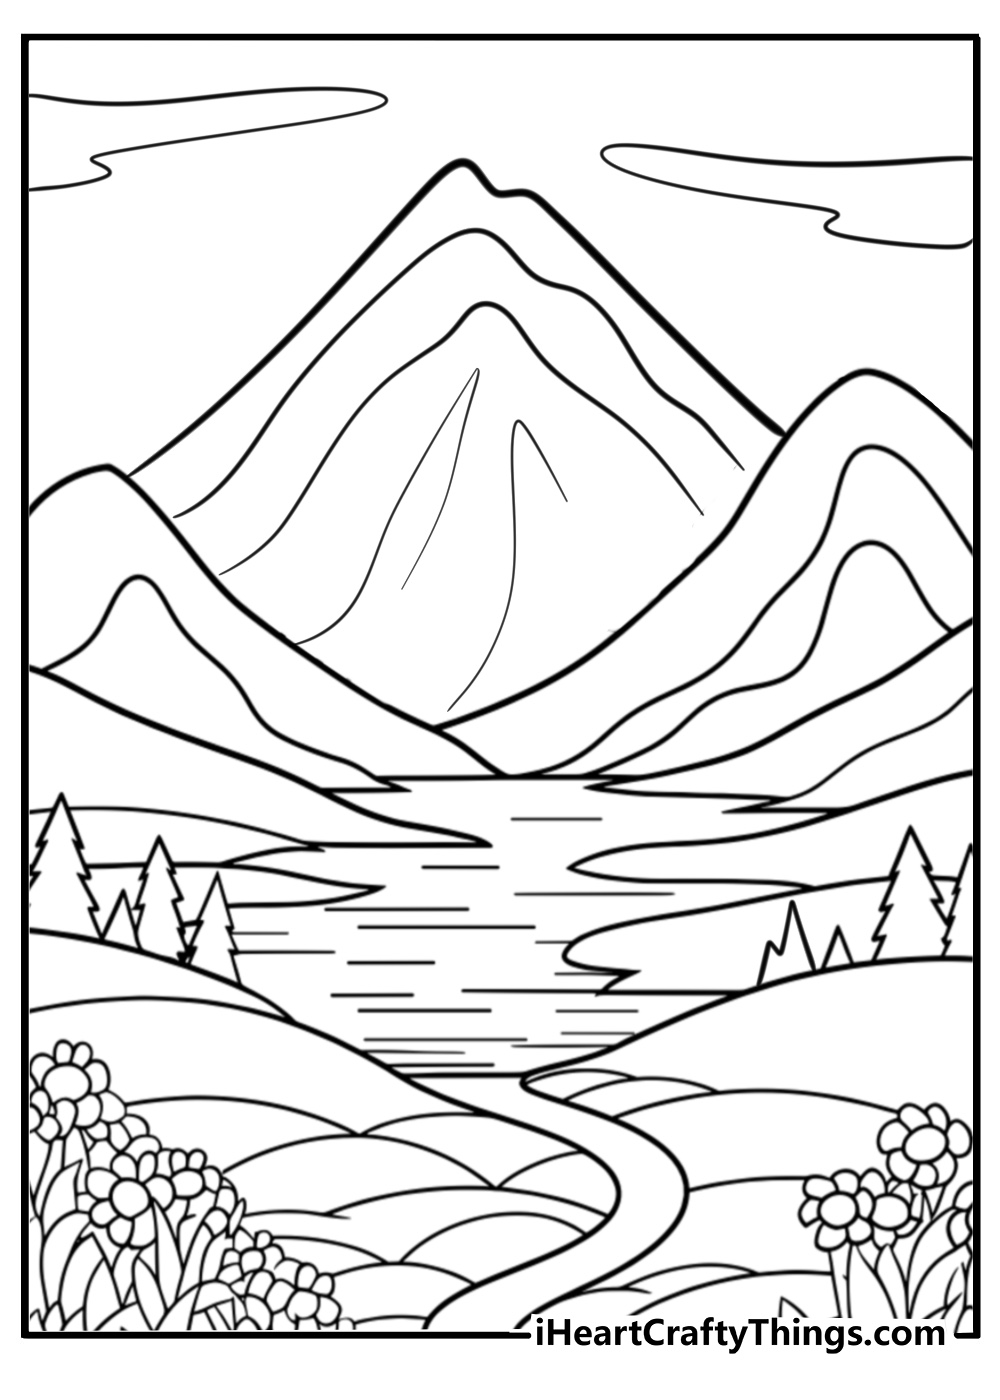 Outdoor coloring pages for adults